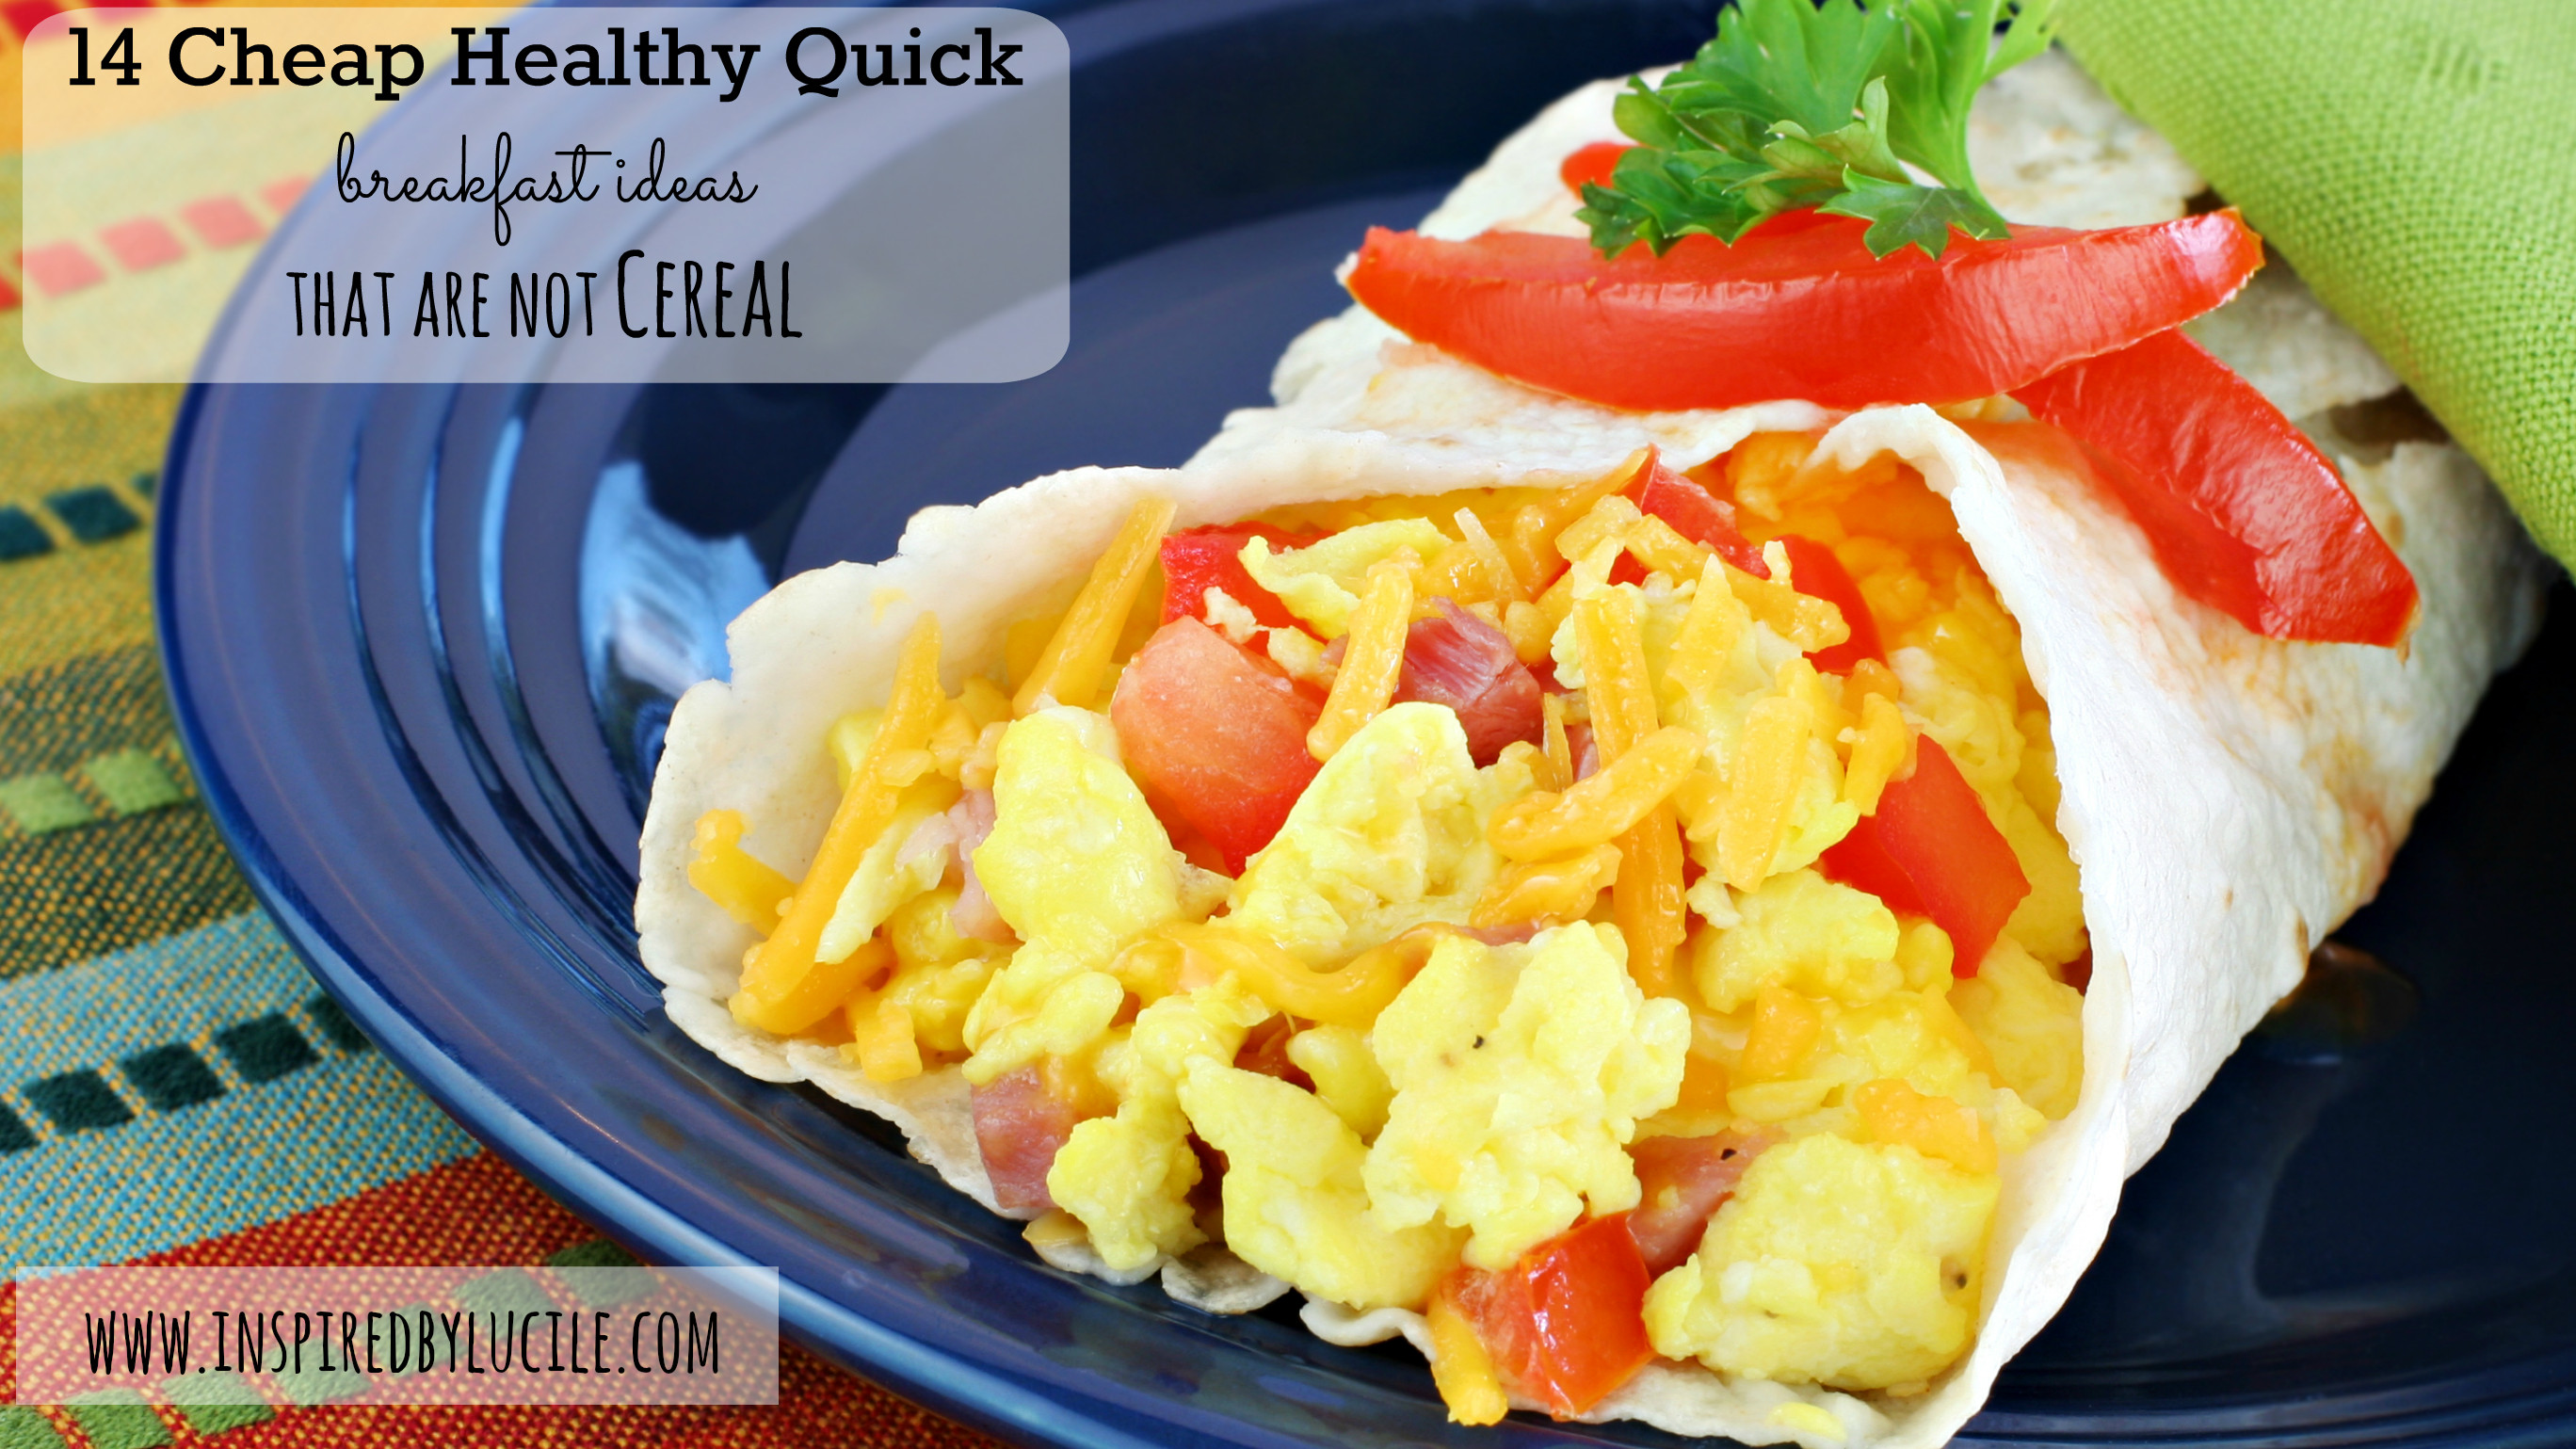 Healthy Cheap Breakfast
 14 Cheap Healthy Quick Breakfast Ideas that Are not Cereal